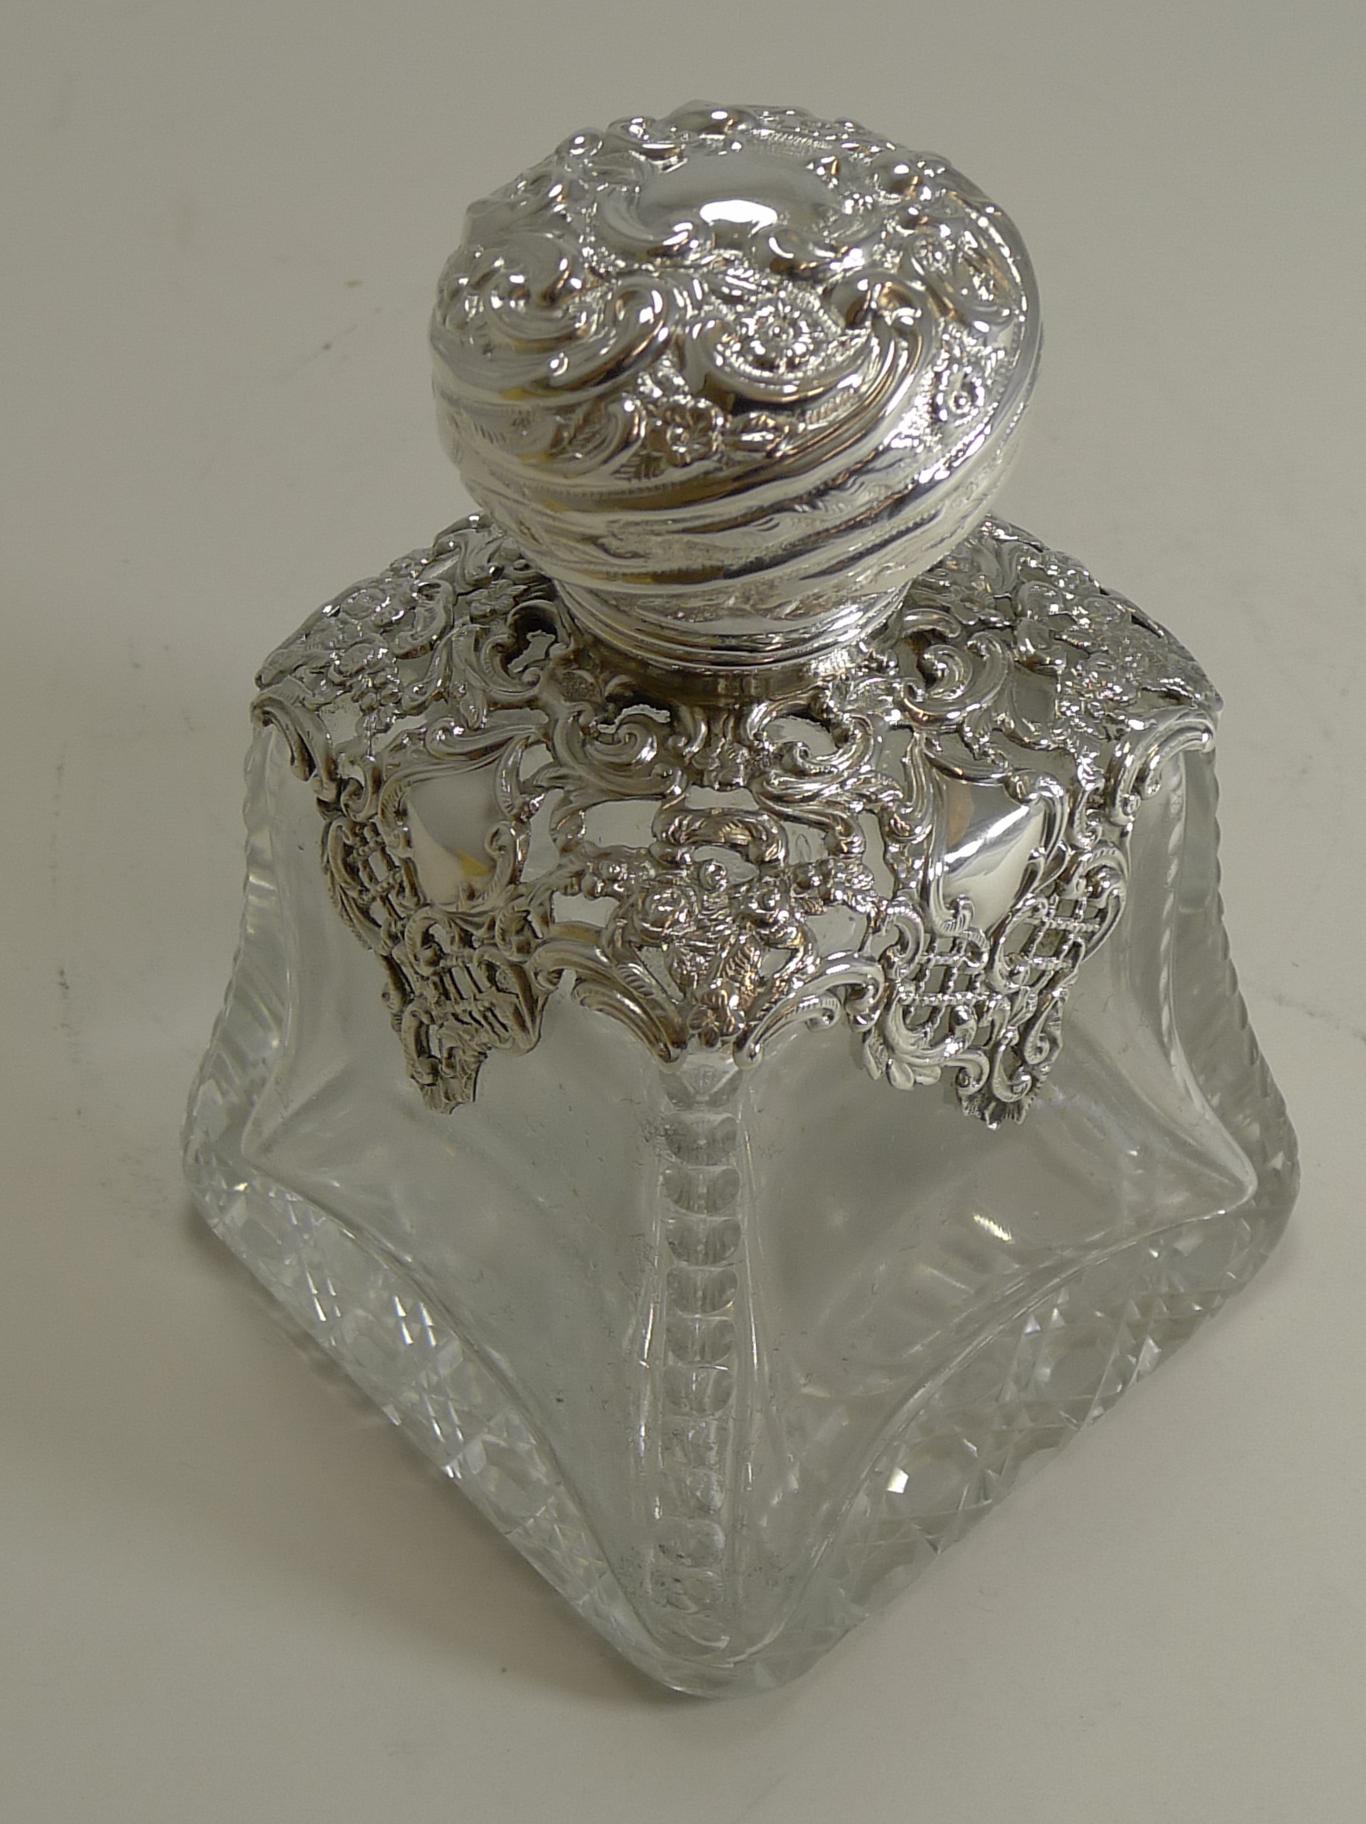 This wonderful and impressive perfume bottle was made from a hefty piece of English crystal with hobnail cutting to the underside and an elegant cut down each corner of the glass.

The hinged lid and applied pierced or reticulated mount that is